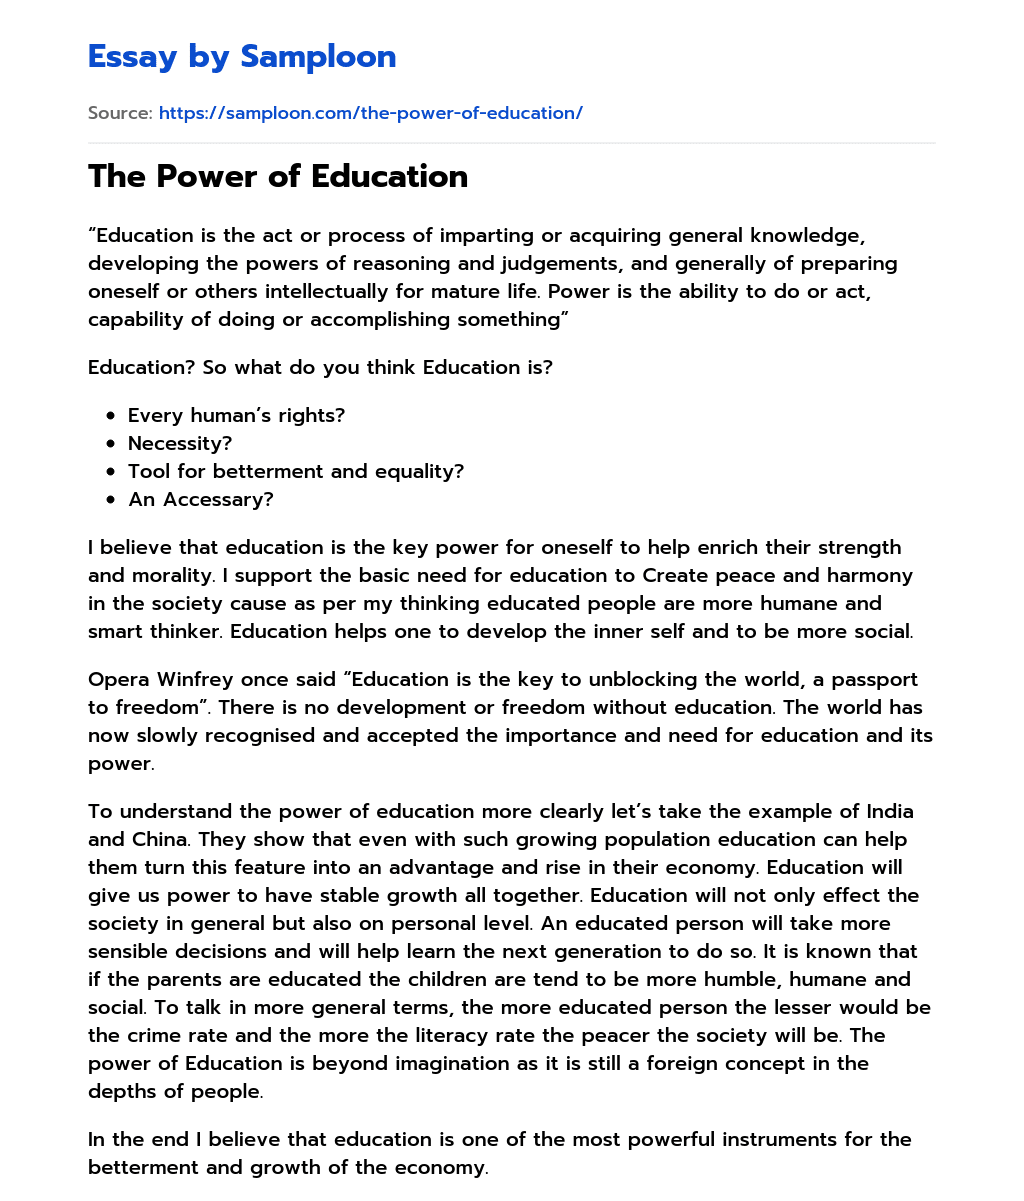 The Power of Education essay